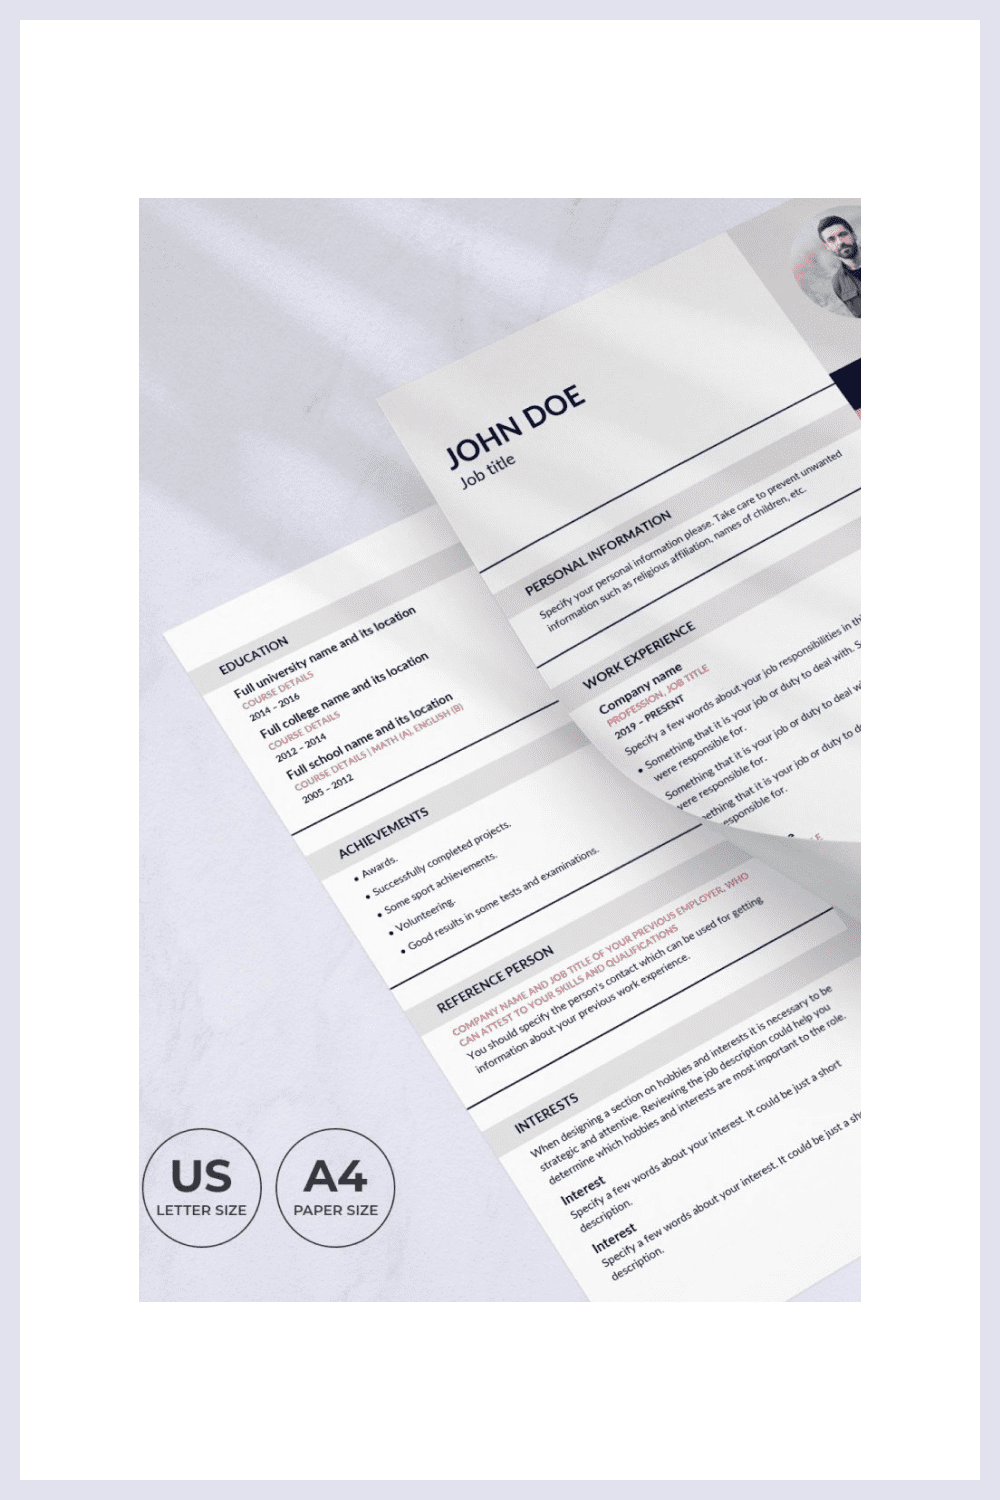 Professional resume is shown on a white background.